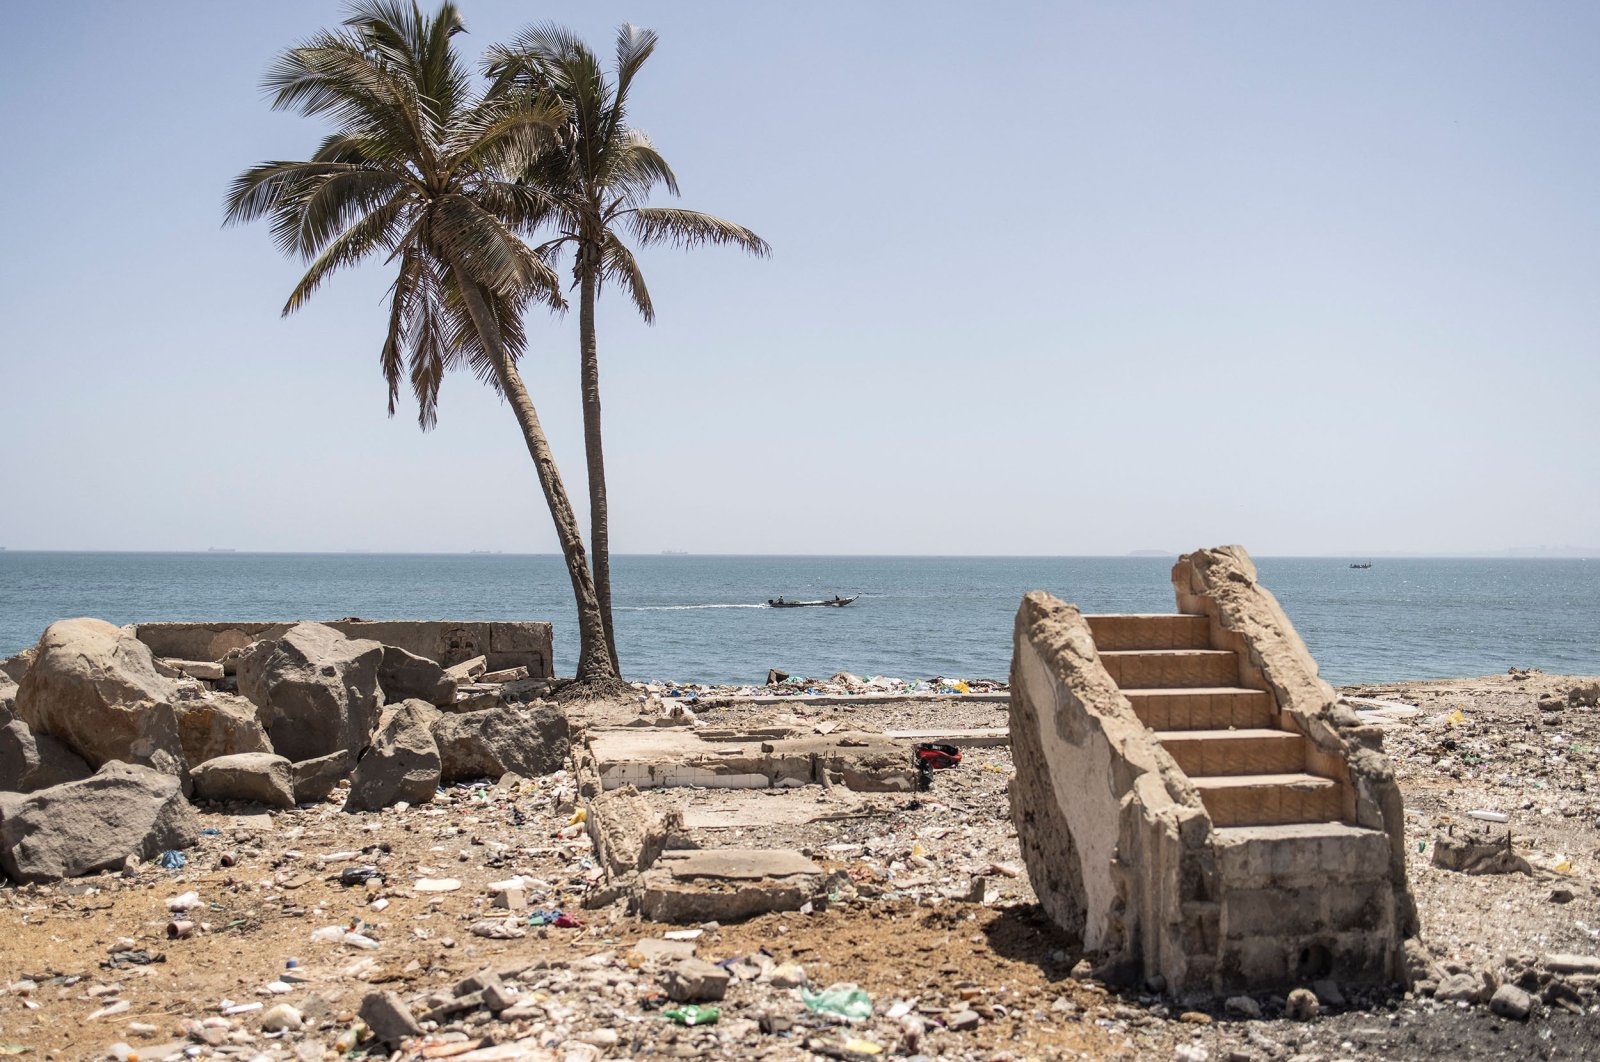 Life in Senegal's chemically polluted Petit Mbao